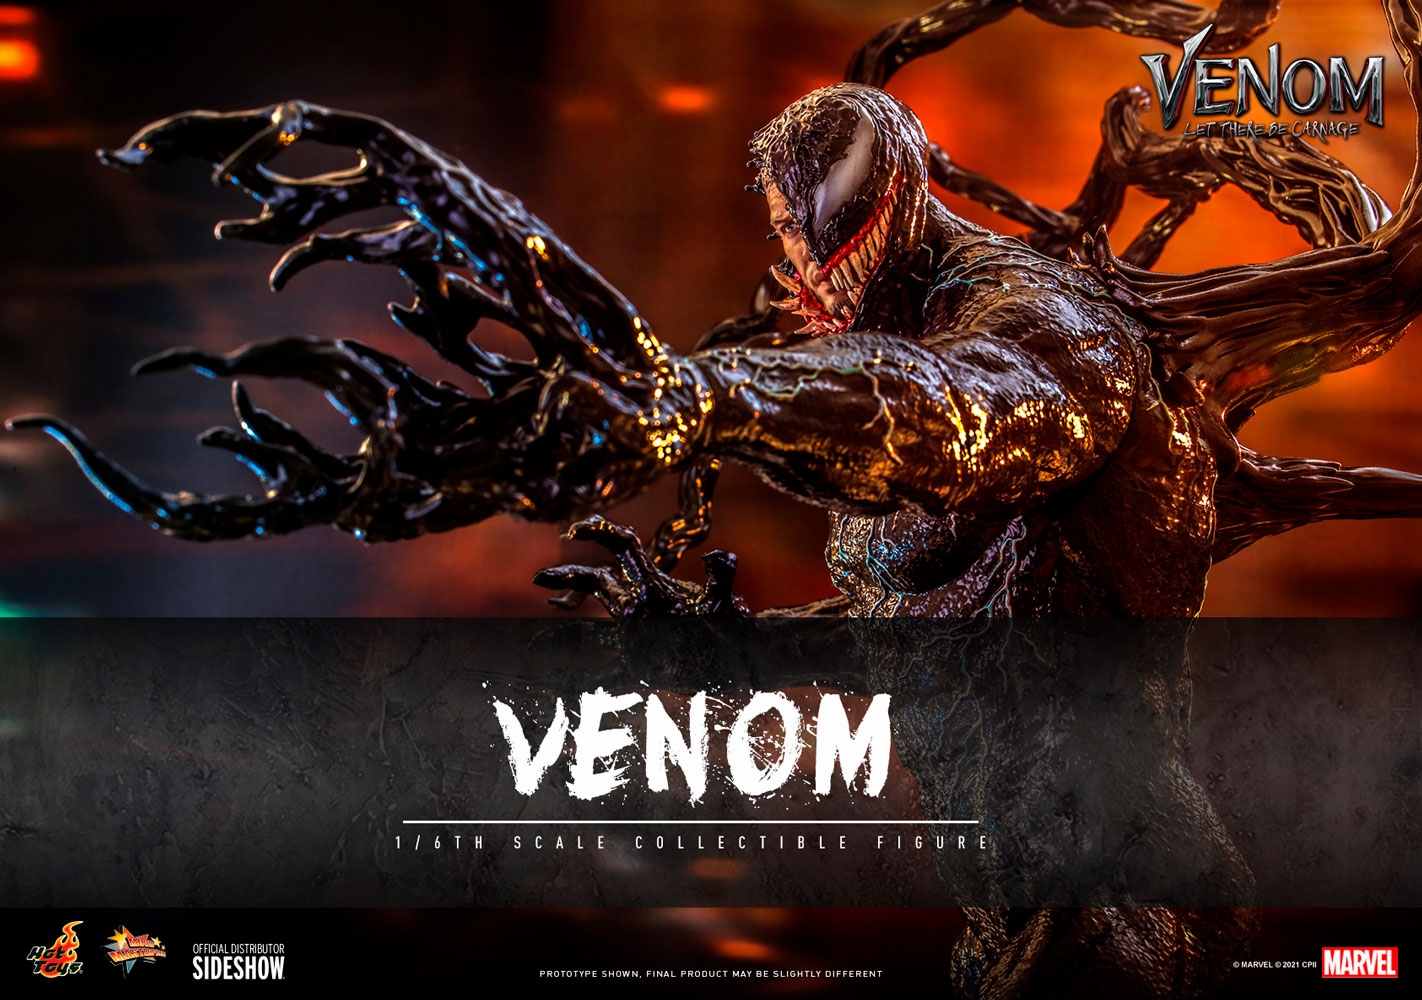 venom-let-there-by-carnage-sixth-scale-figure_marvel_gallery_61a515ed8312d.jpg